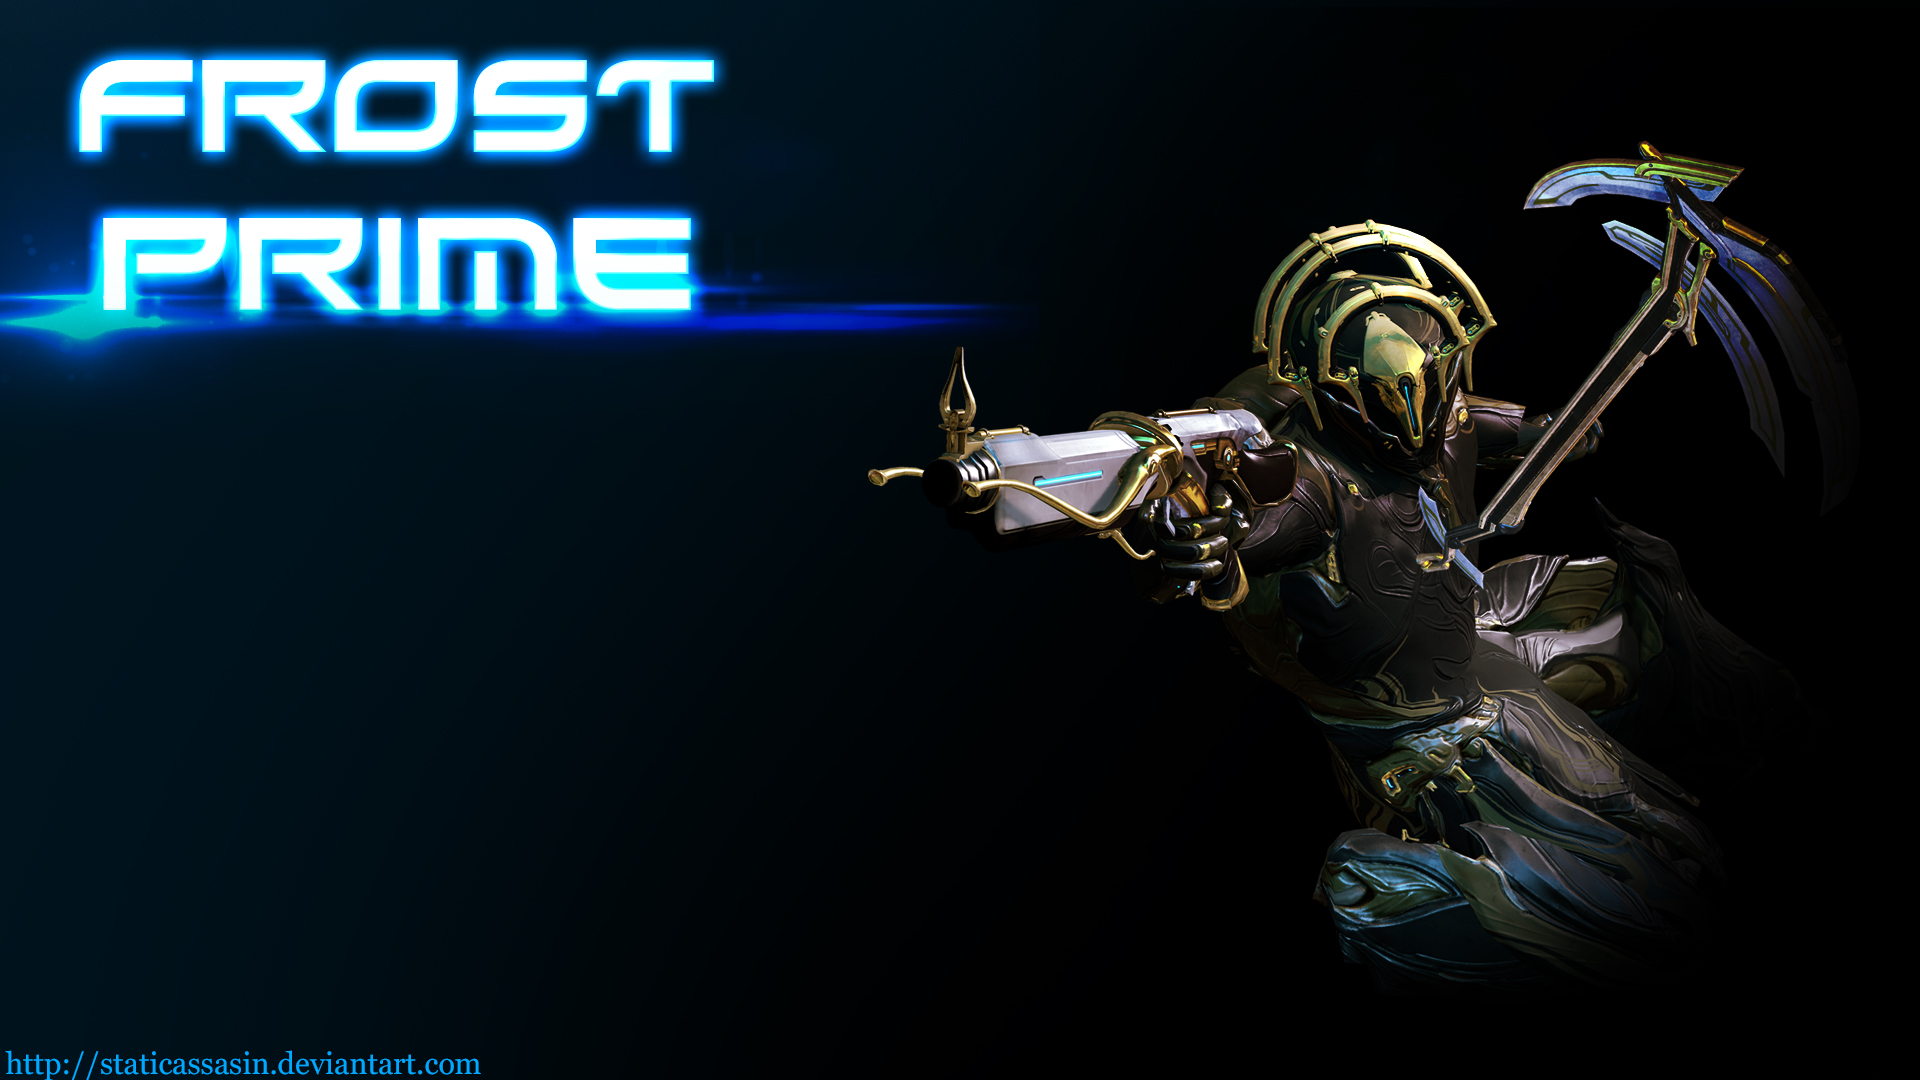 Frost Prime Darkness Background By Staticassasin